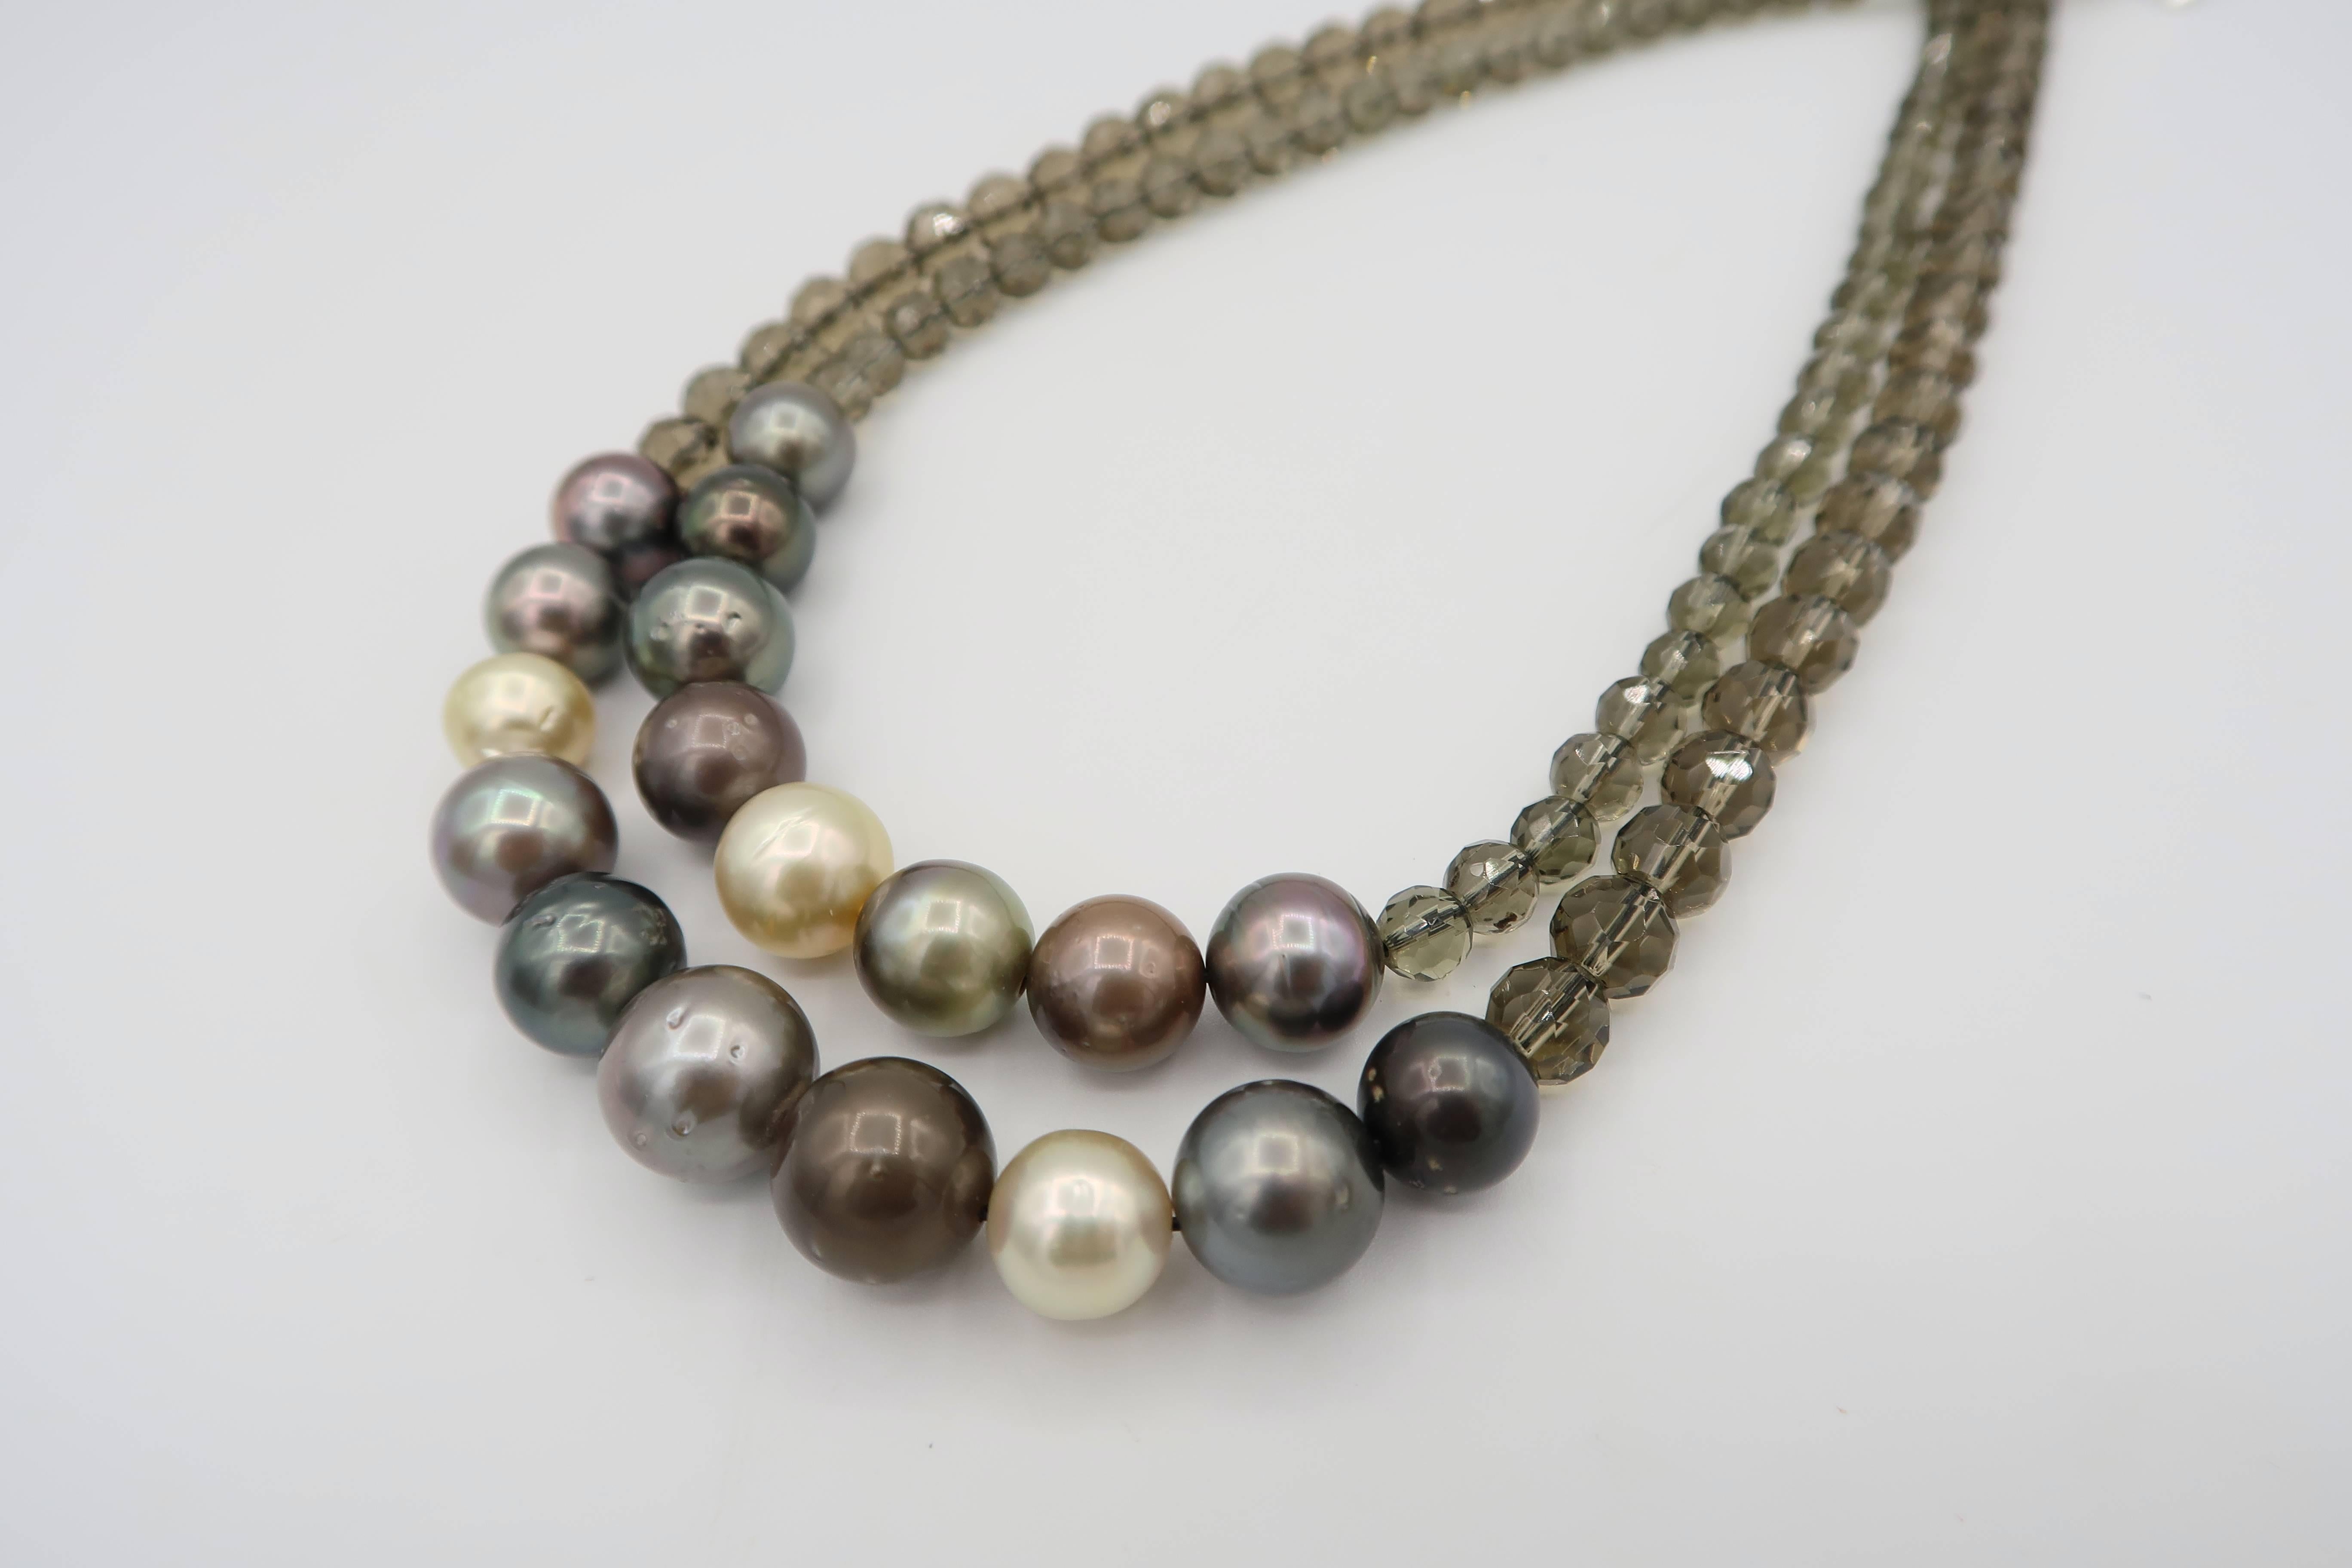 Understated jewellery for everyday wear.

Pearls : 18 pieces South Sea pearls and Tahitian pearls
Smoky Quartz : 105 pieces
Silver clasp

Length: 17.5